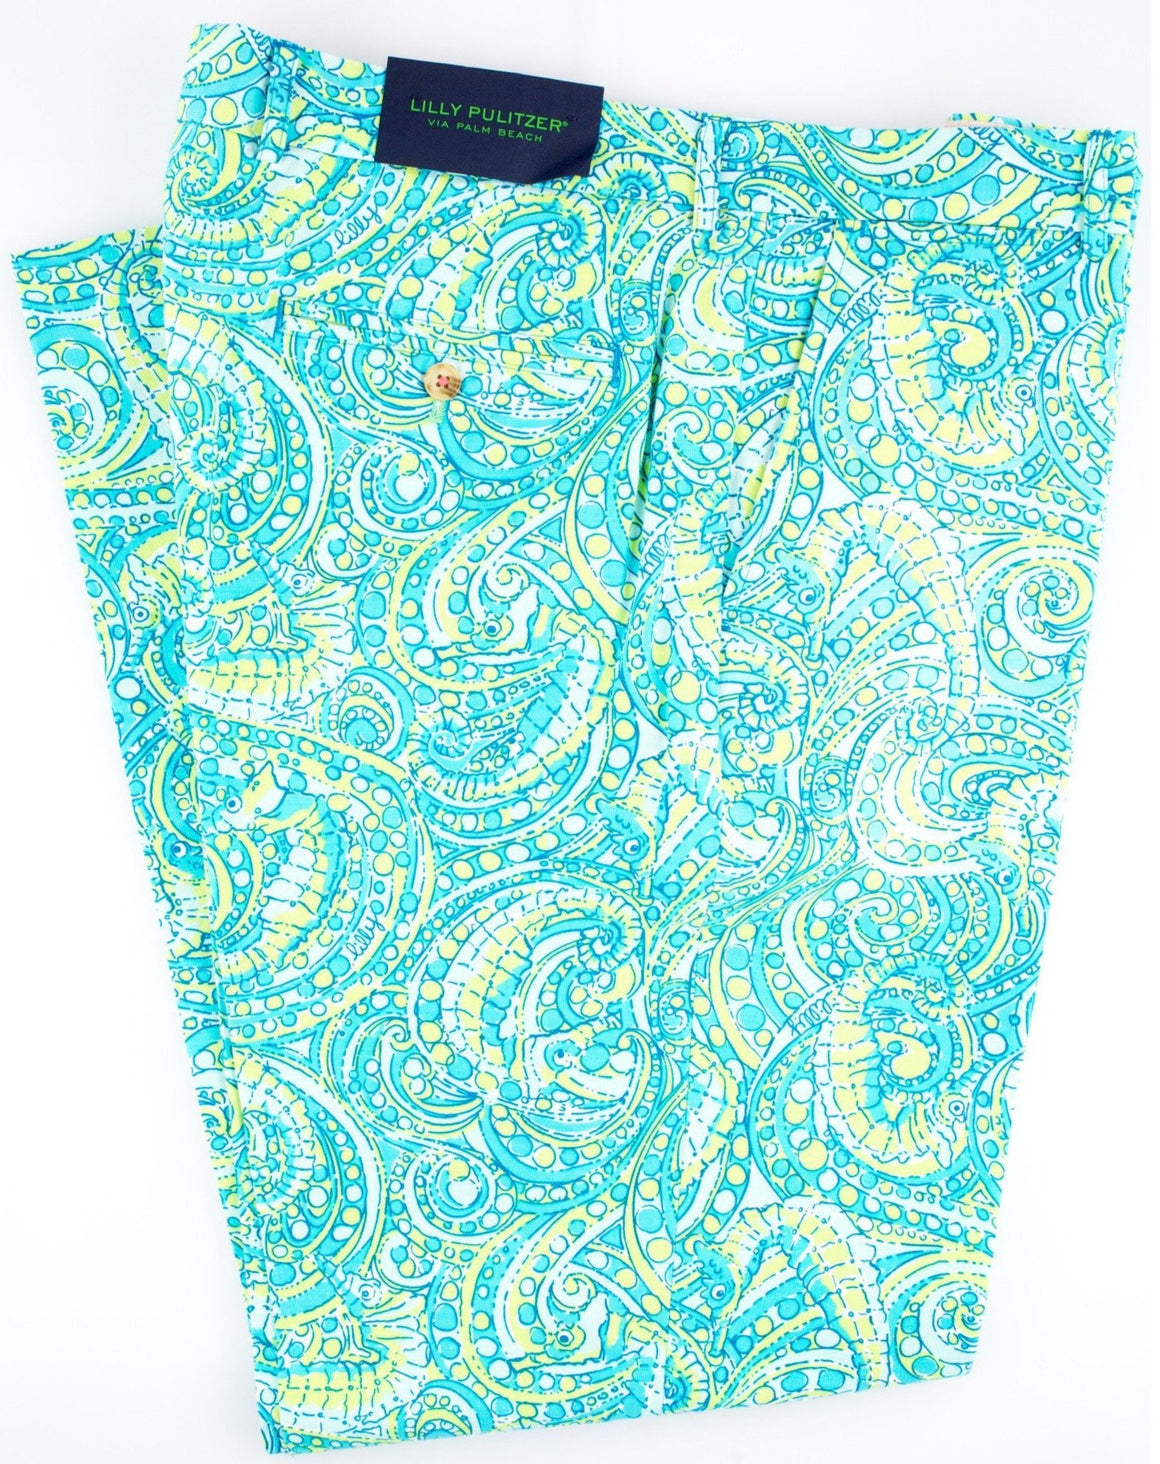 Lilly Pulitzer Seahorse Print Trousers Sz: 36"W